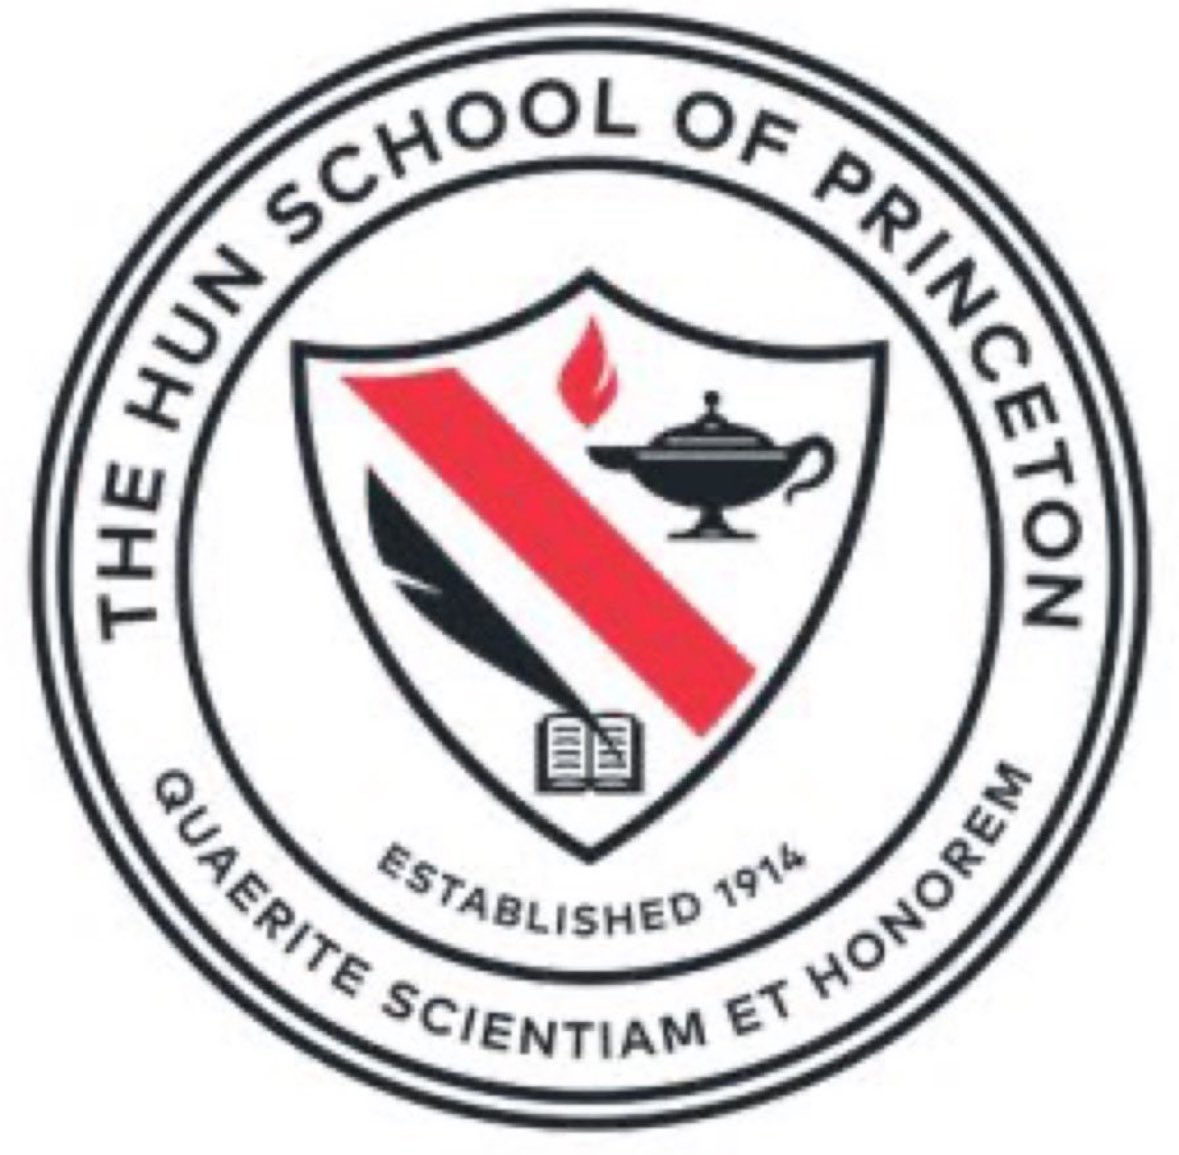 I’m excited to announce that I will be entering the 2025 class at The Hun School Of Princeton. Thank you @GreenwichFB for everything you’ve done for me and I’m excited for this new chapter. @Red_Zone75